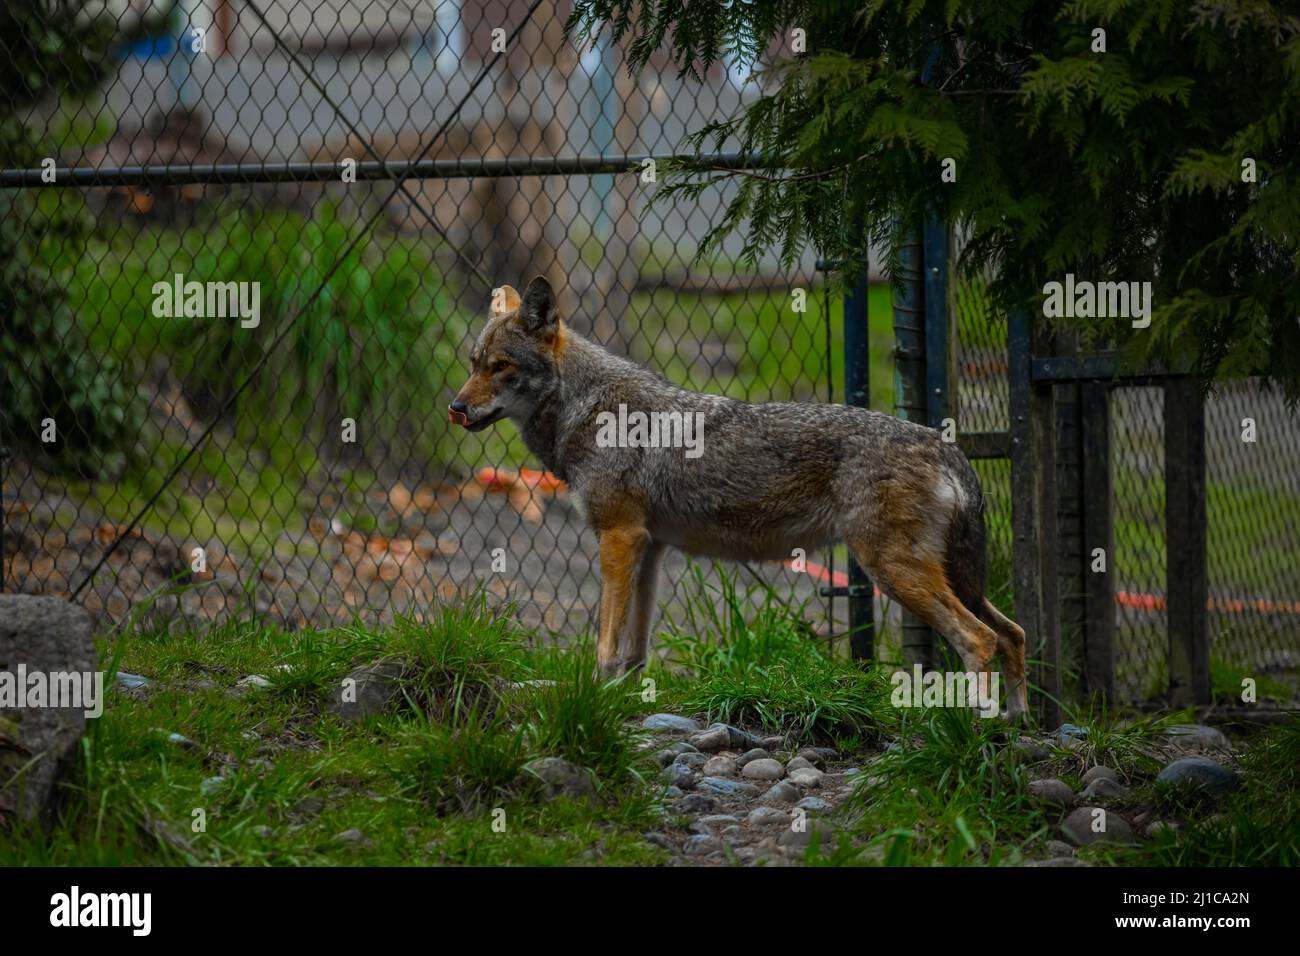 There is something unnerving about a wolf lurking near a chain link fence. It's as if the animal is studying its surroundings, ready to make a move. T Stock Photo